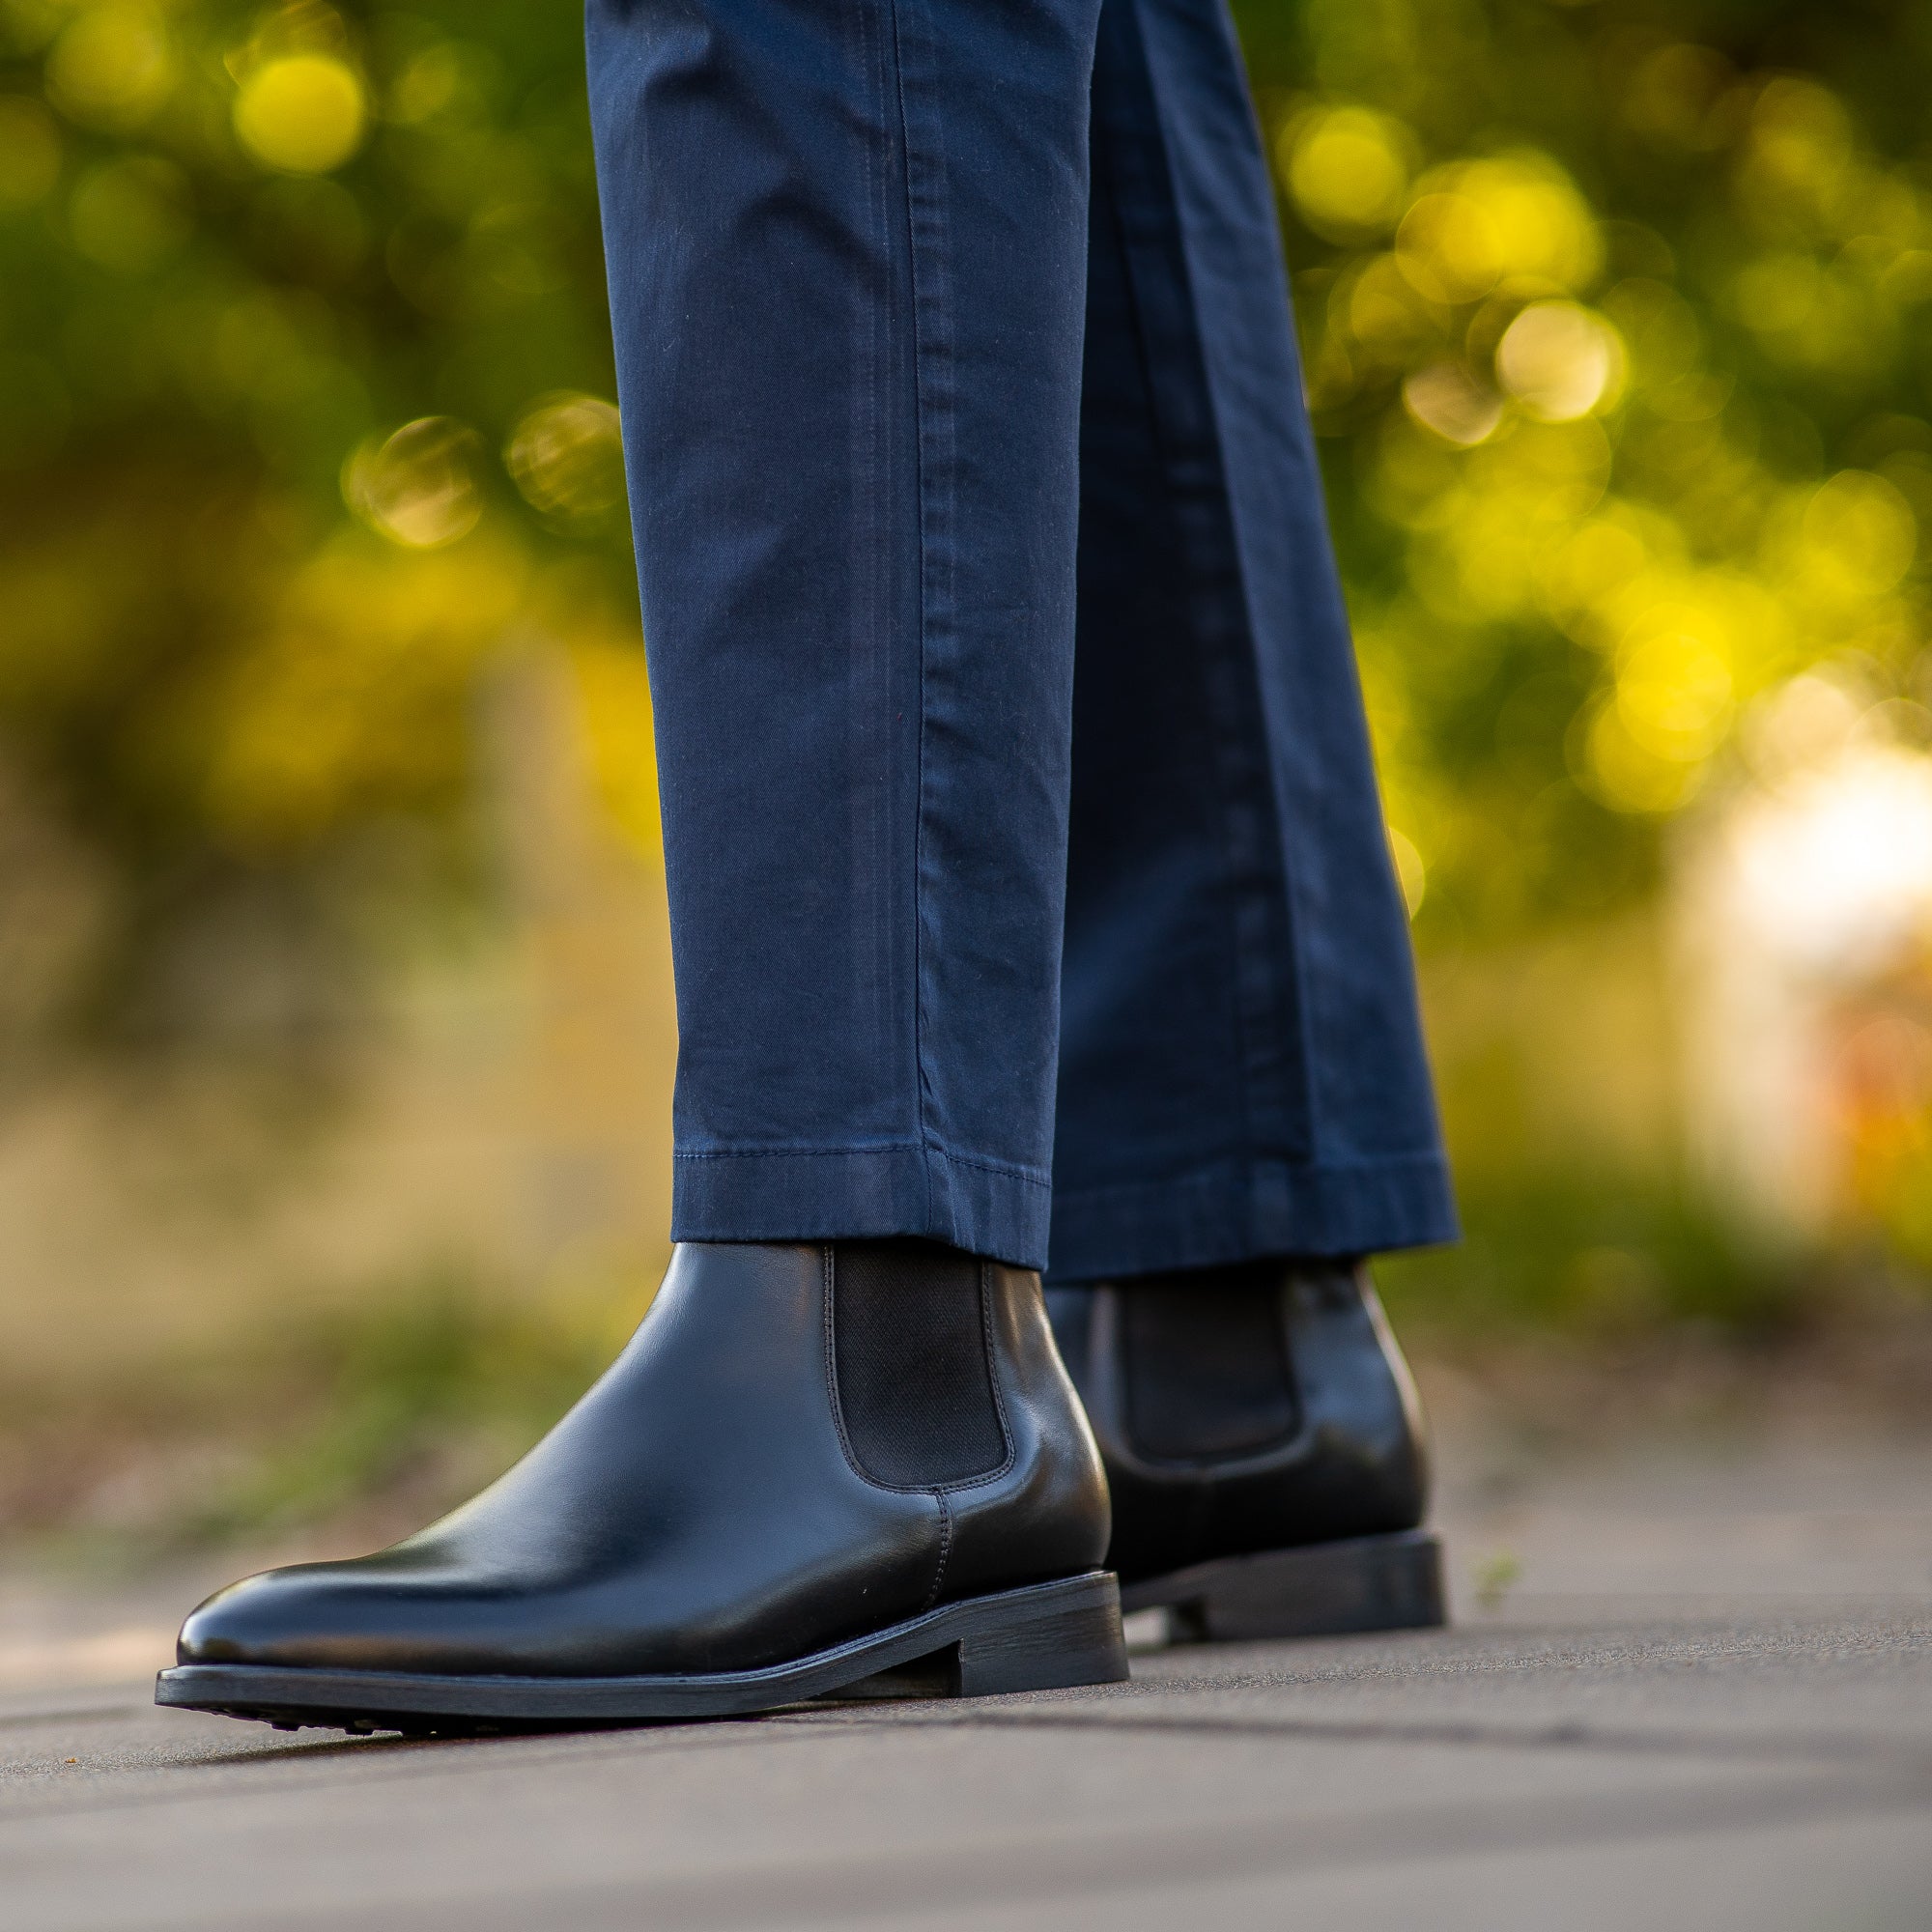 Shop Black chelsea Boots For The Office, Weddings and Special Events. Wear With Jeans, chinos and Suits.